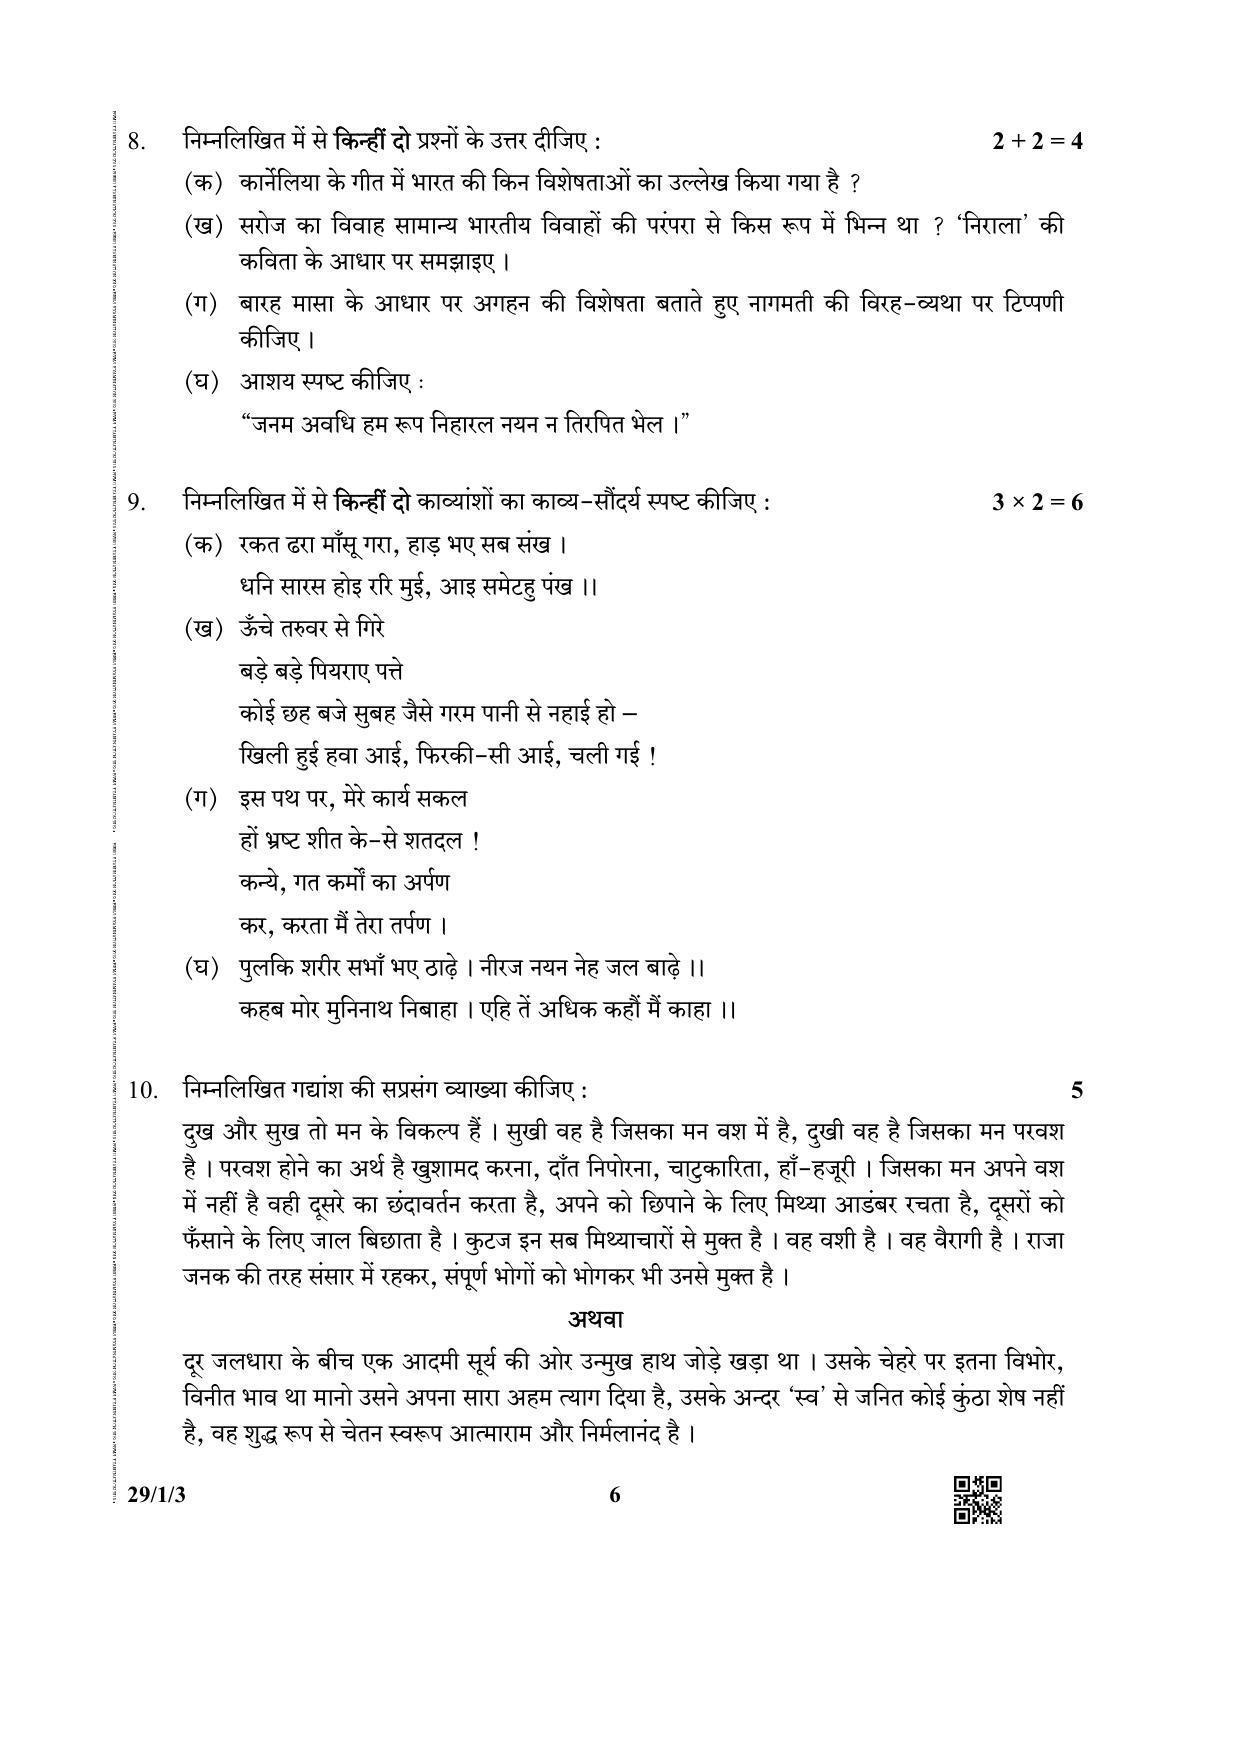 CBSE Class 12 29-1-3 (Hindi ELECTIVE) 2019 Question Paper - Page 6